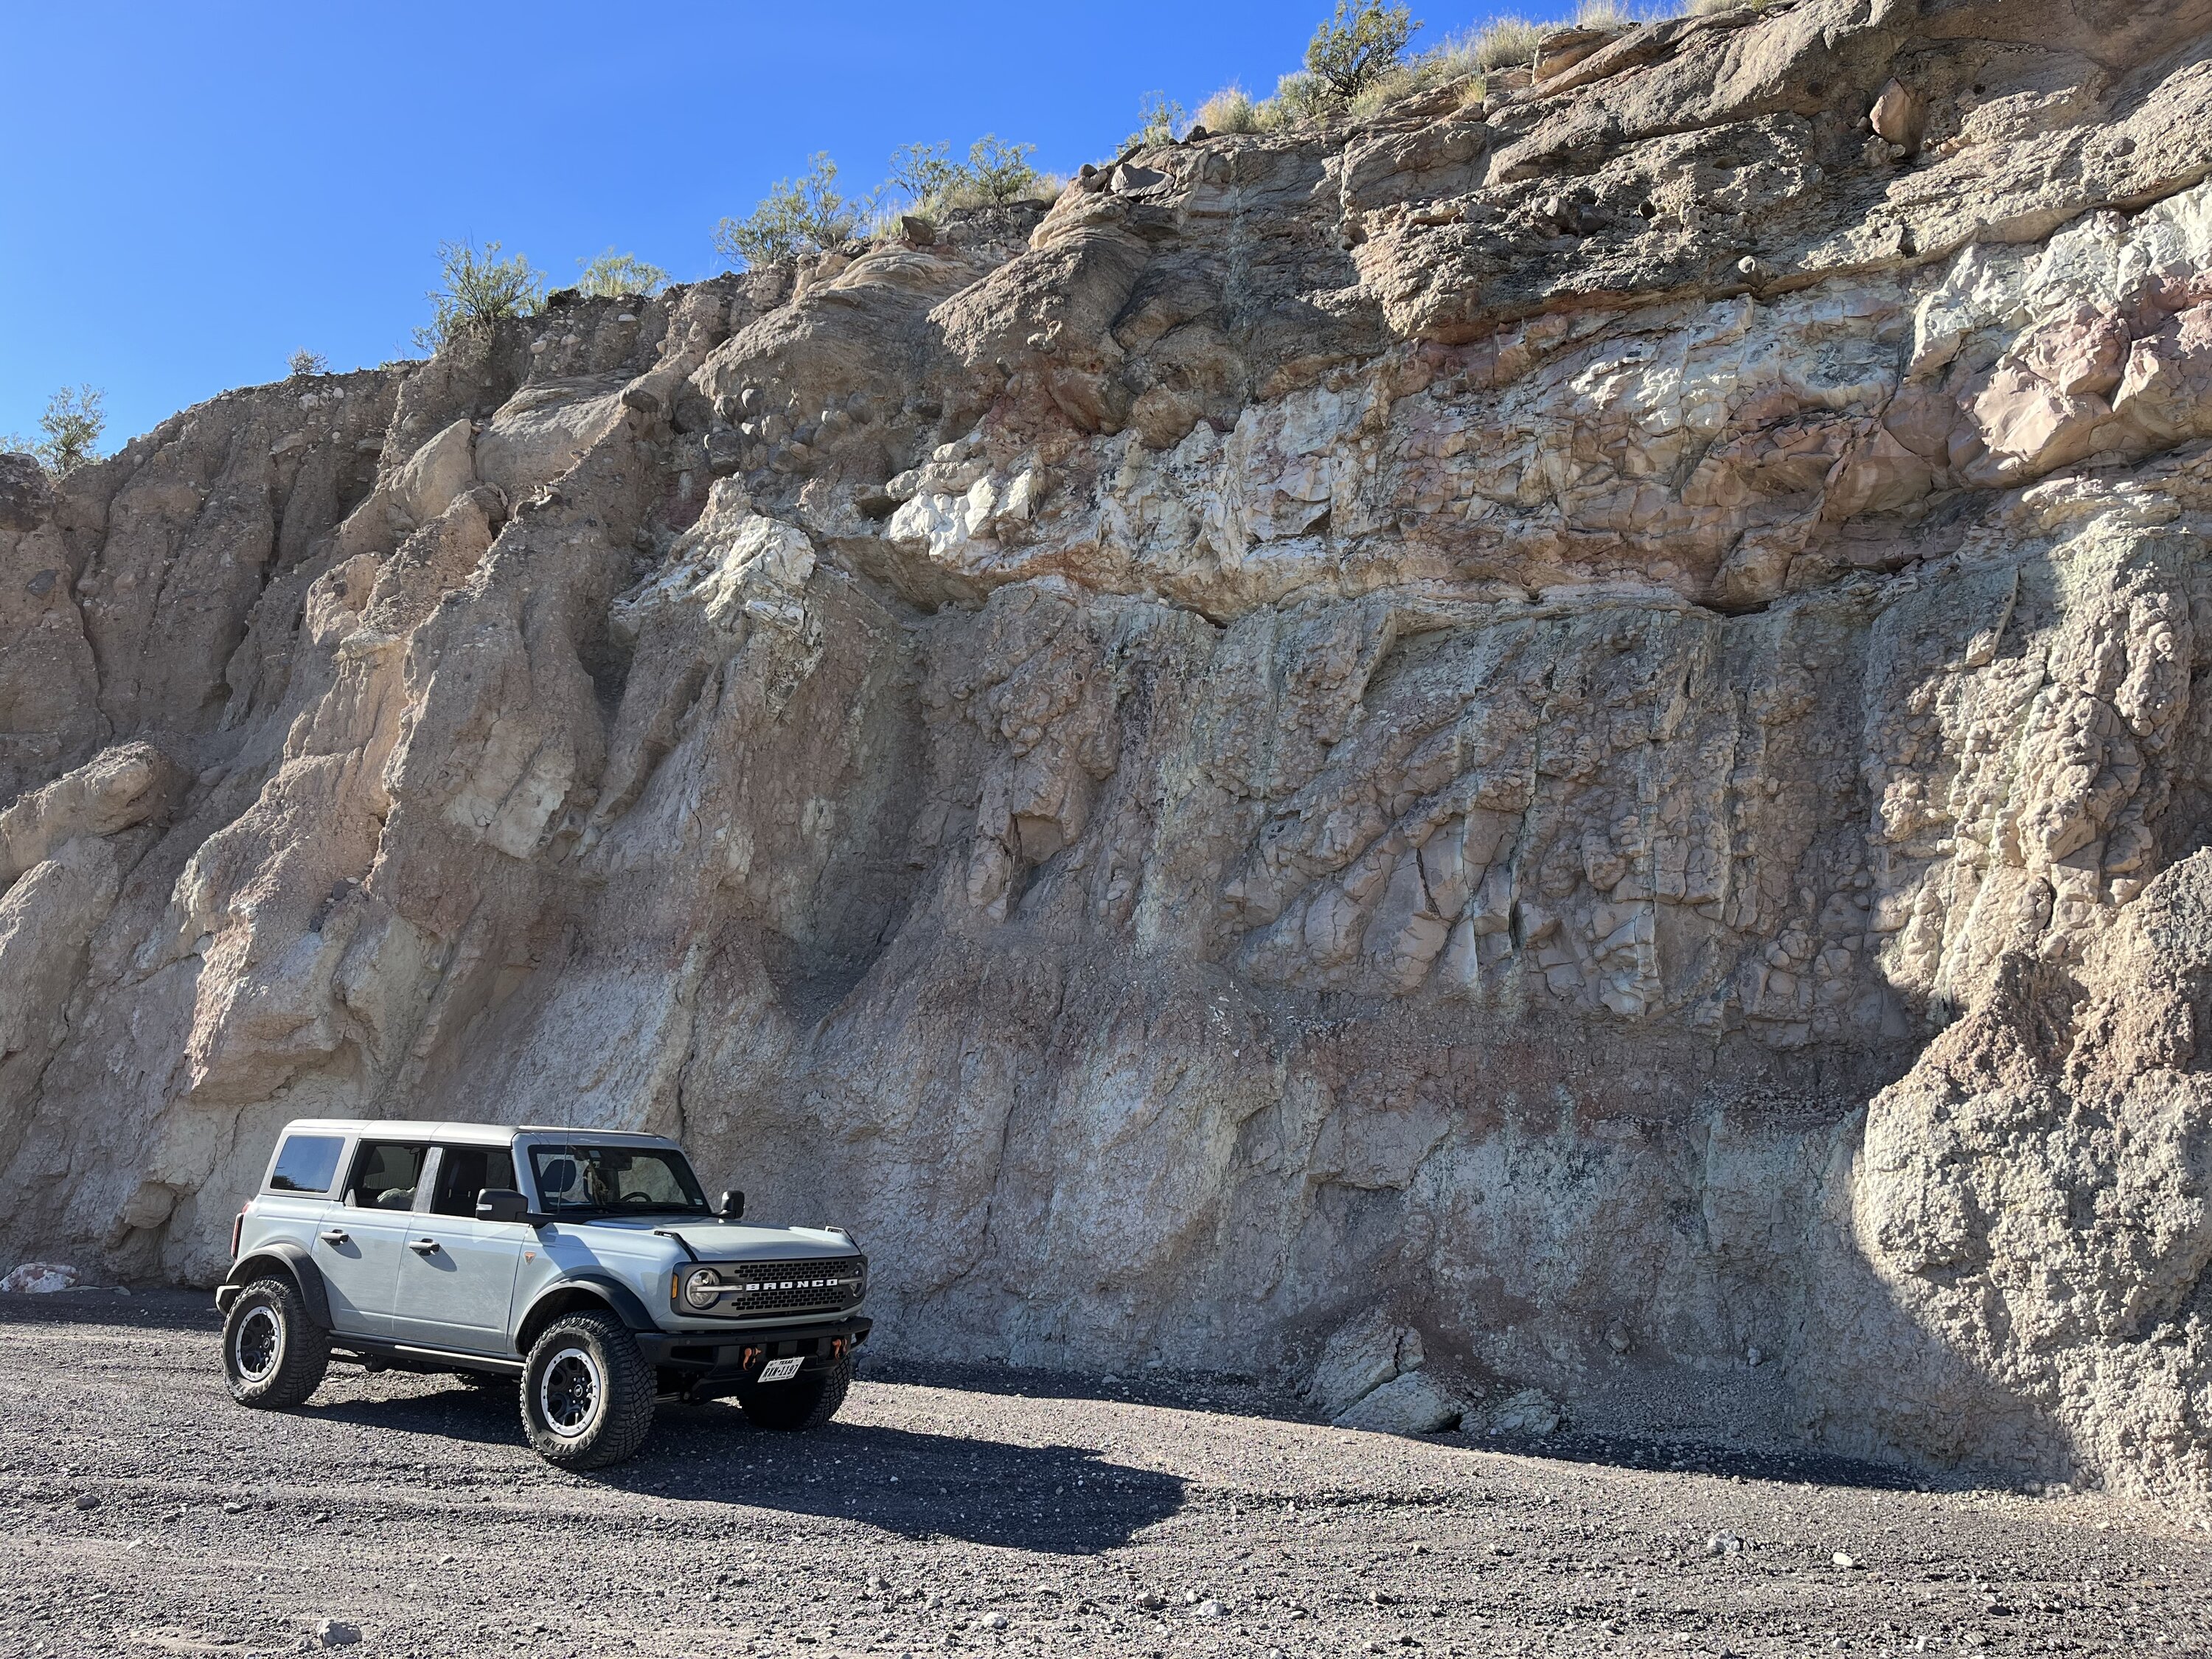 Ford Bronco Let's see your favorite trail photos! 16FC5916-56AE-490B-9570-6D94D7DD7F22